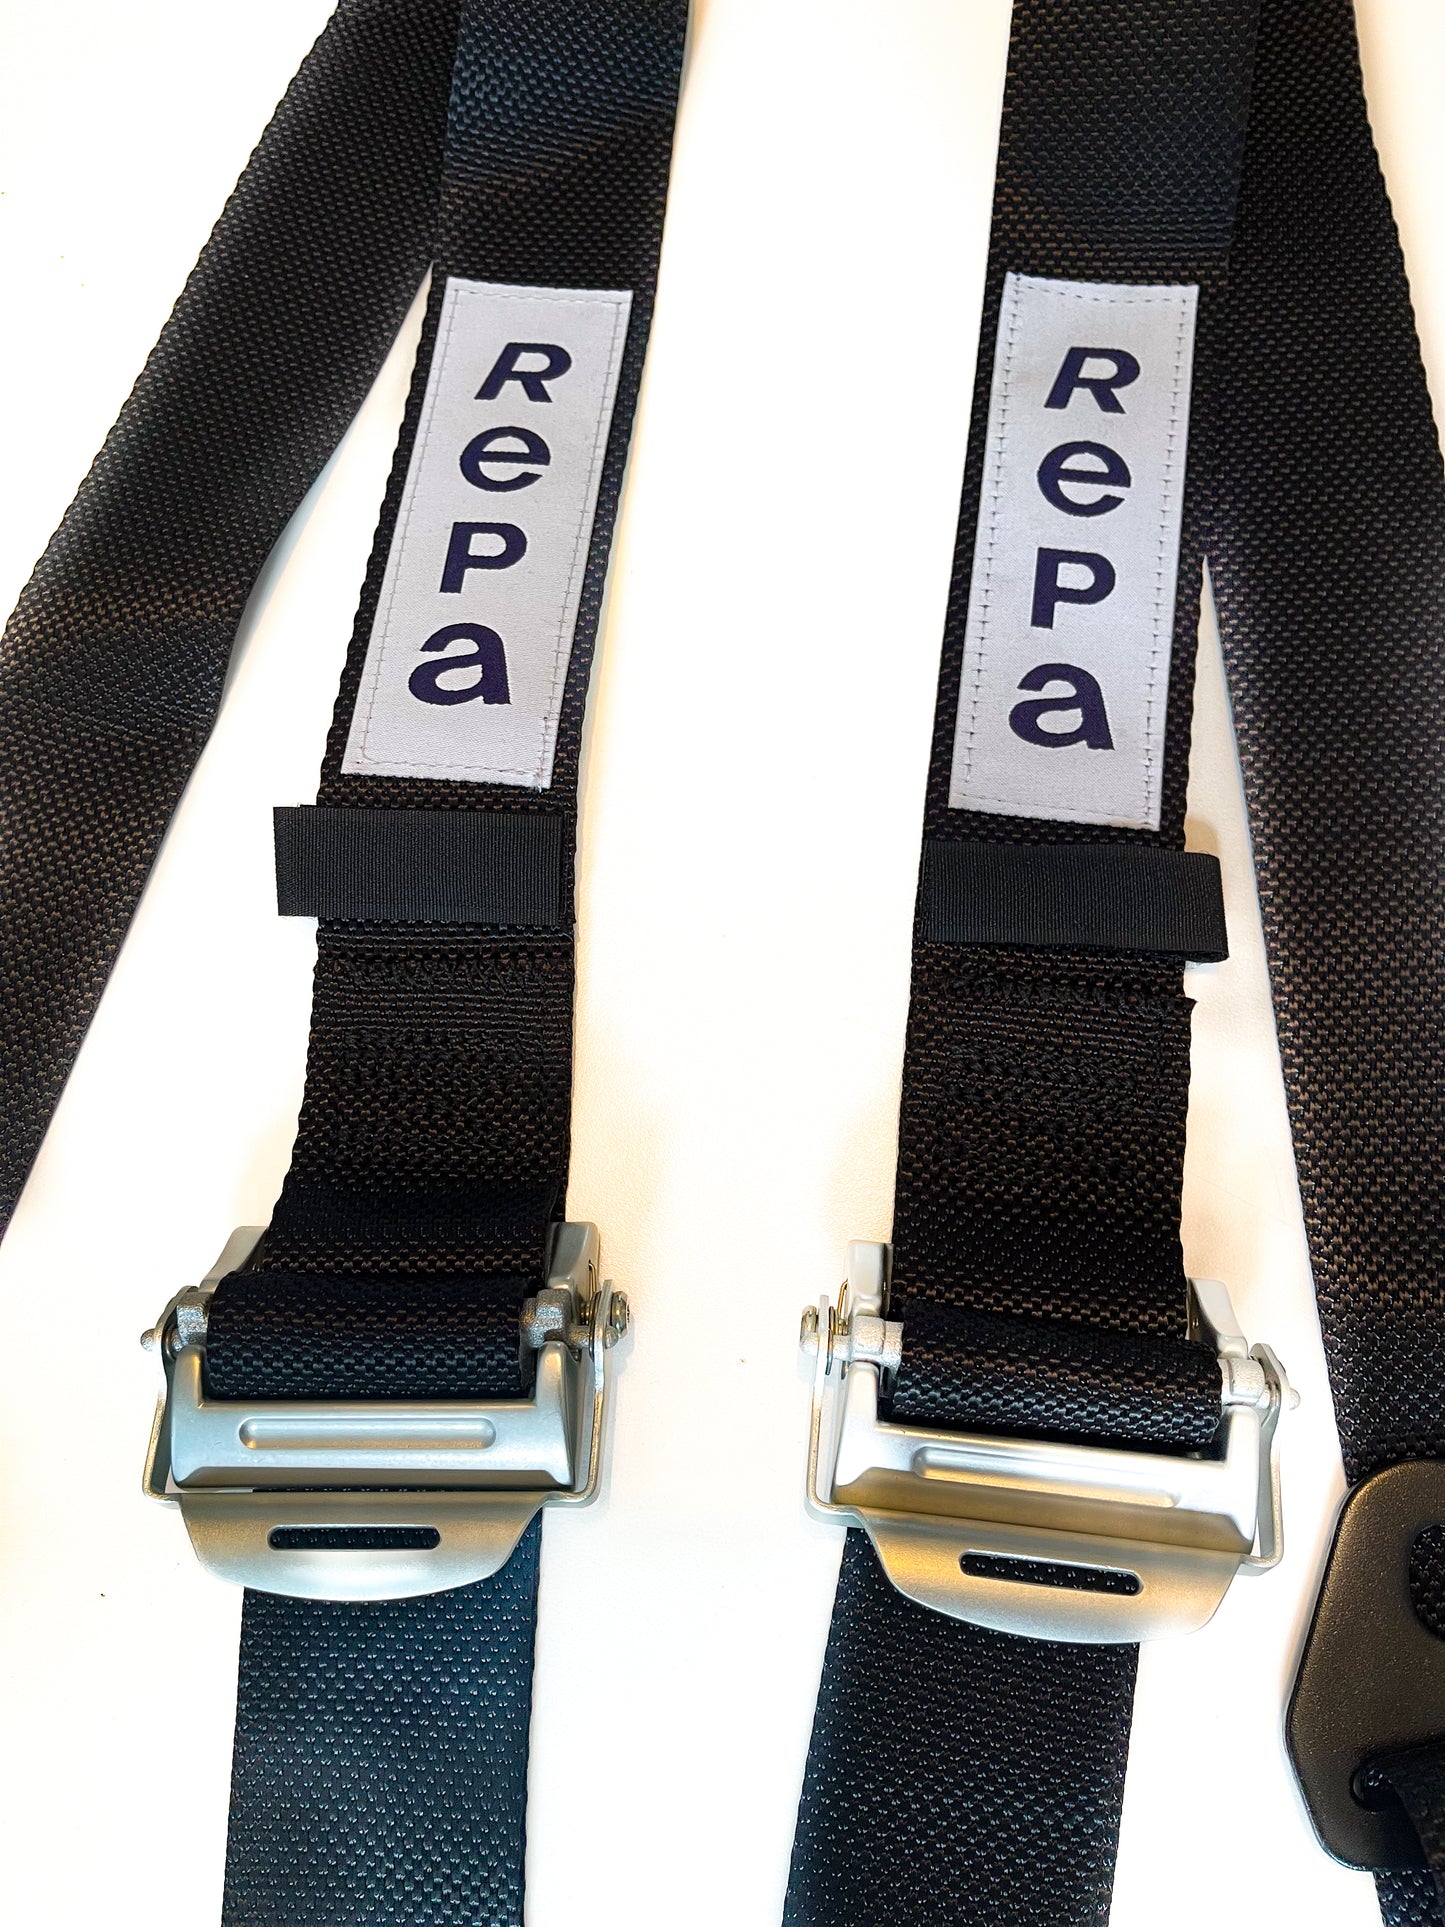 REPA PULL 2023 - "PULL DOWN" SAFETY 6 POINTS FIA HARNESS